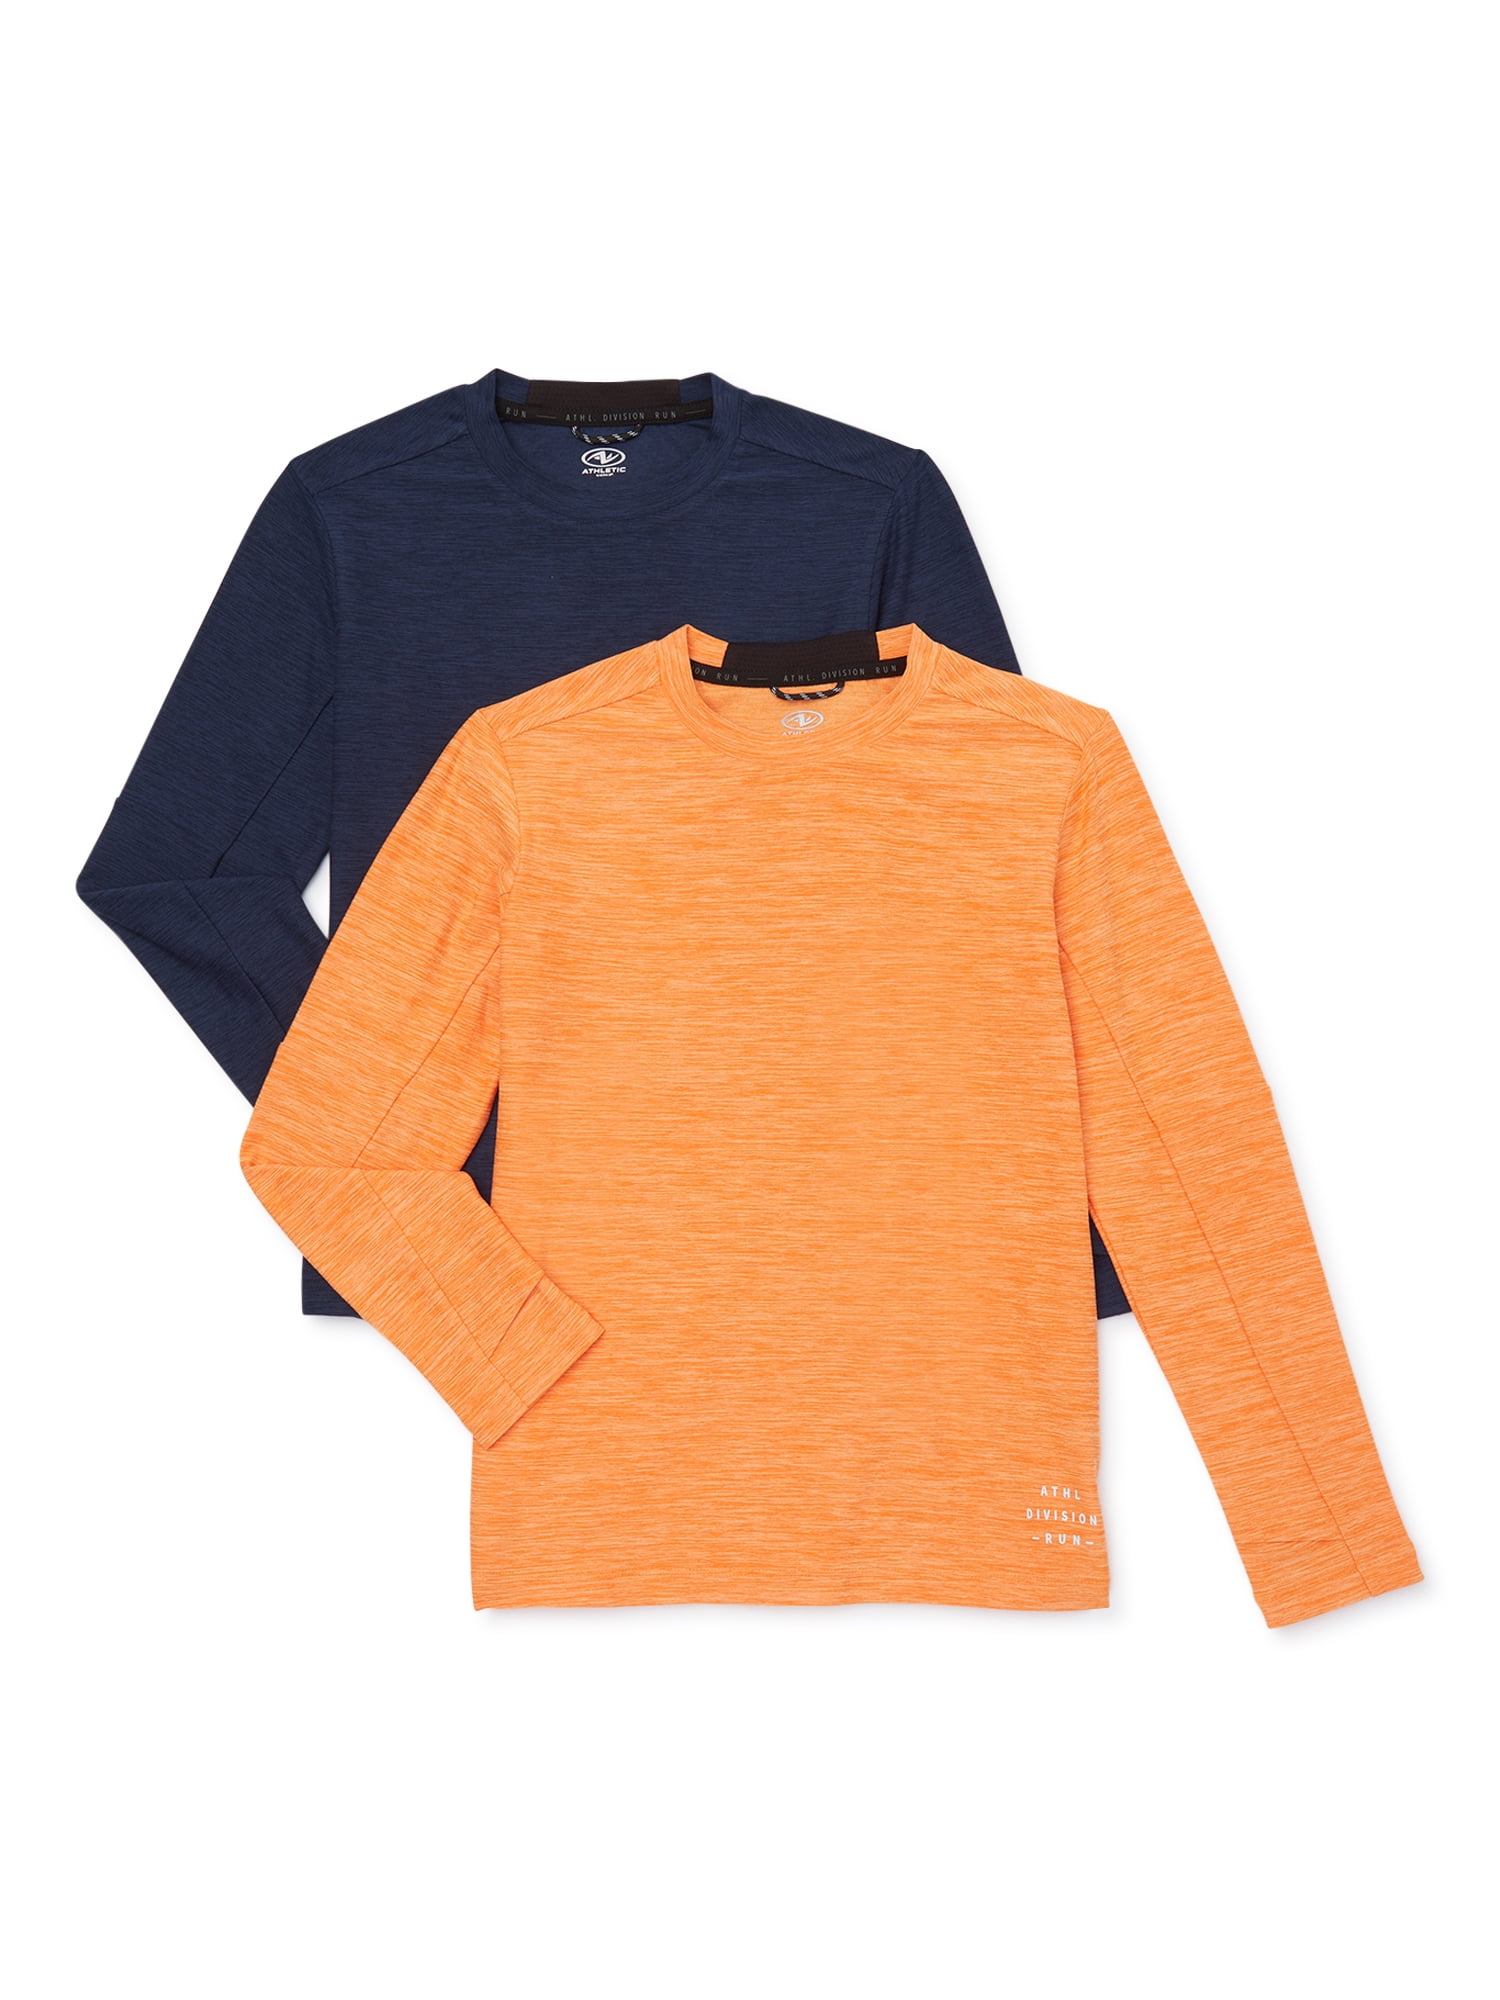 Athletic Works Boys Long Sleeve Top, 2-Pack, Sizes 4-18 & Husky ...